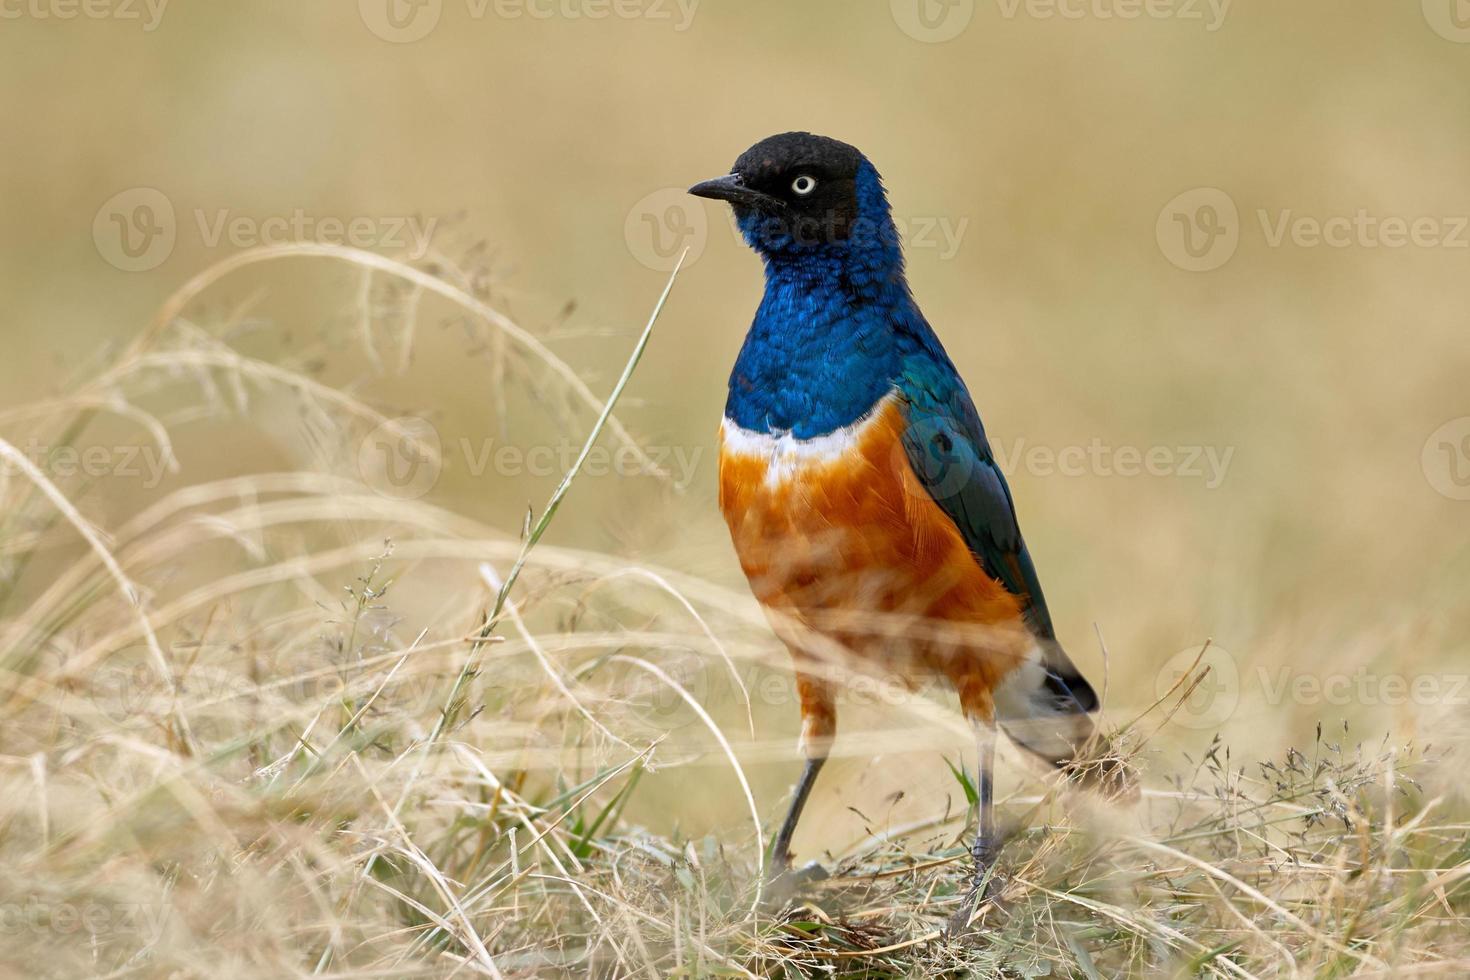 Superb starling, African and colored bird photo